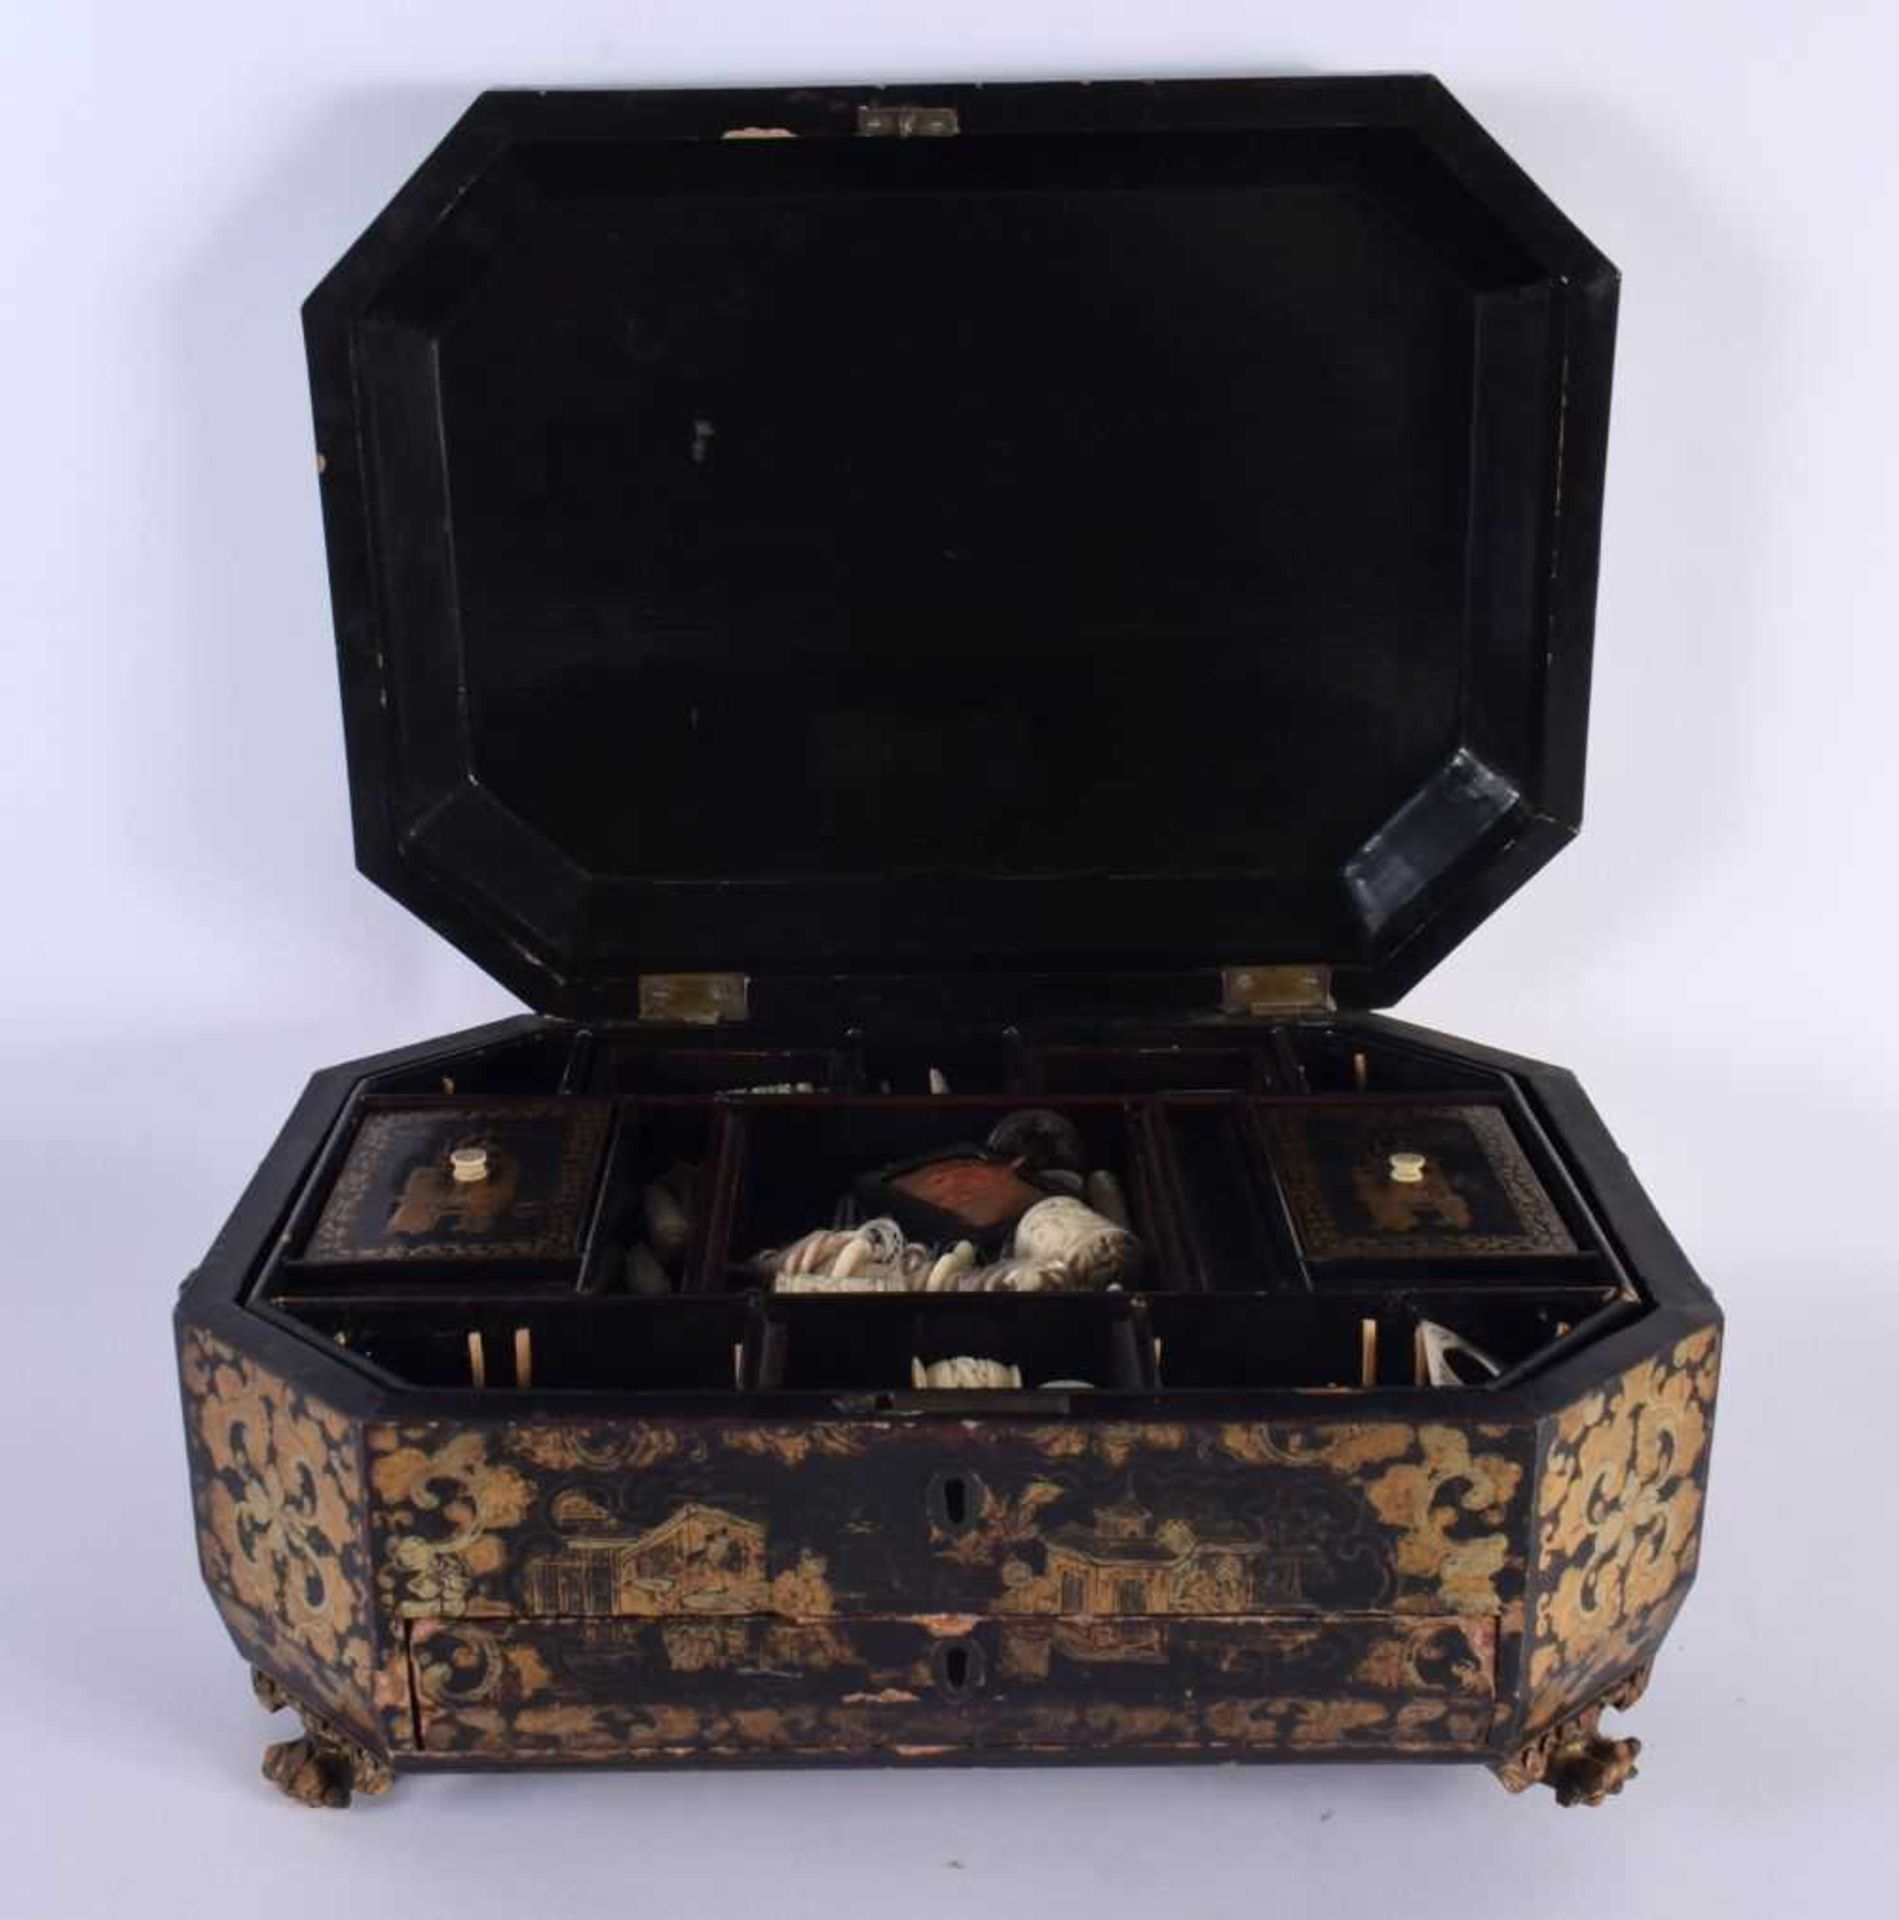 A LATE 18TH/19TH CENTURY CHINESE EXPORT RED AND BLACK LACQUER CASKET painted with Chinese figures in - Image 2 of 6